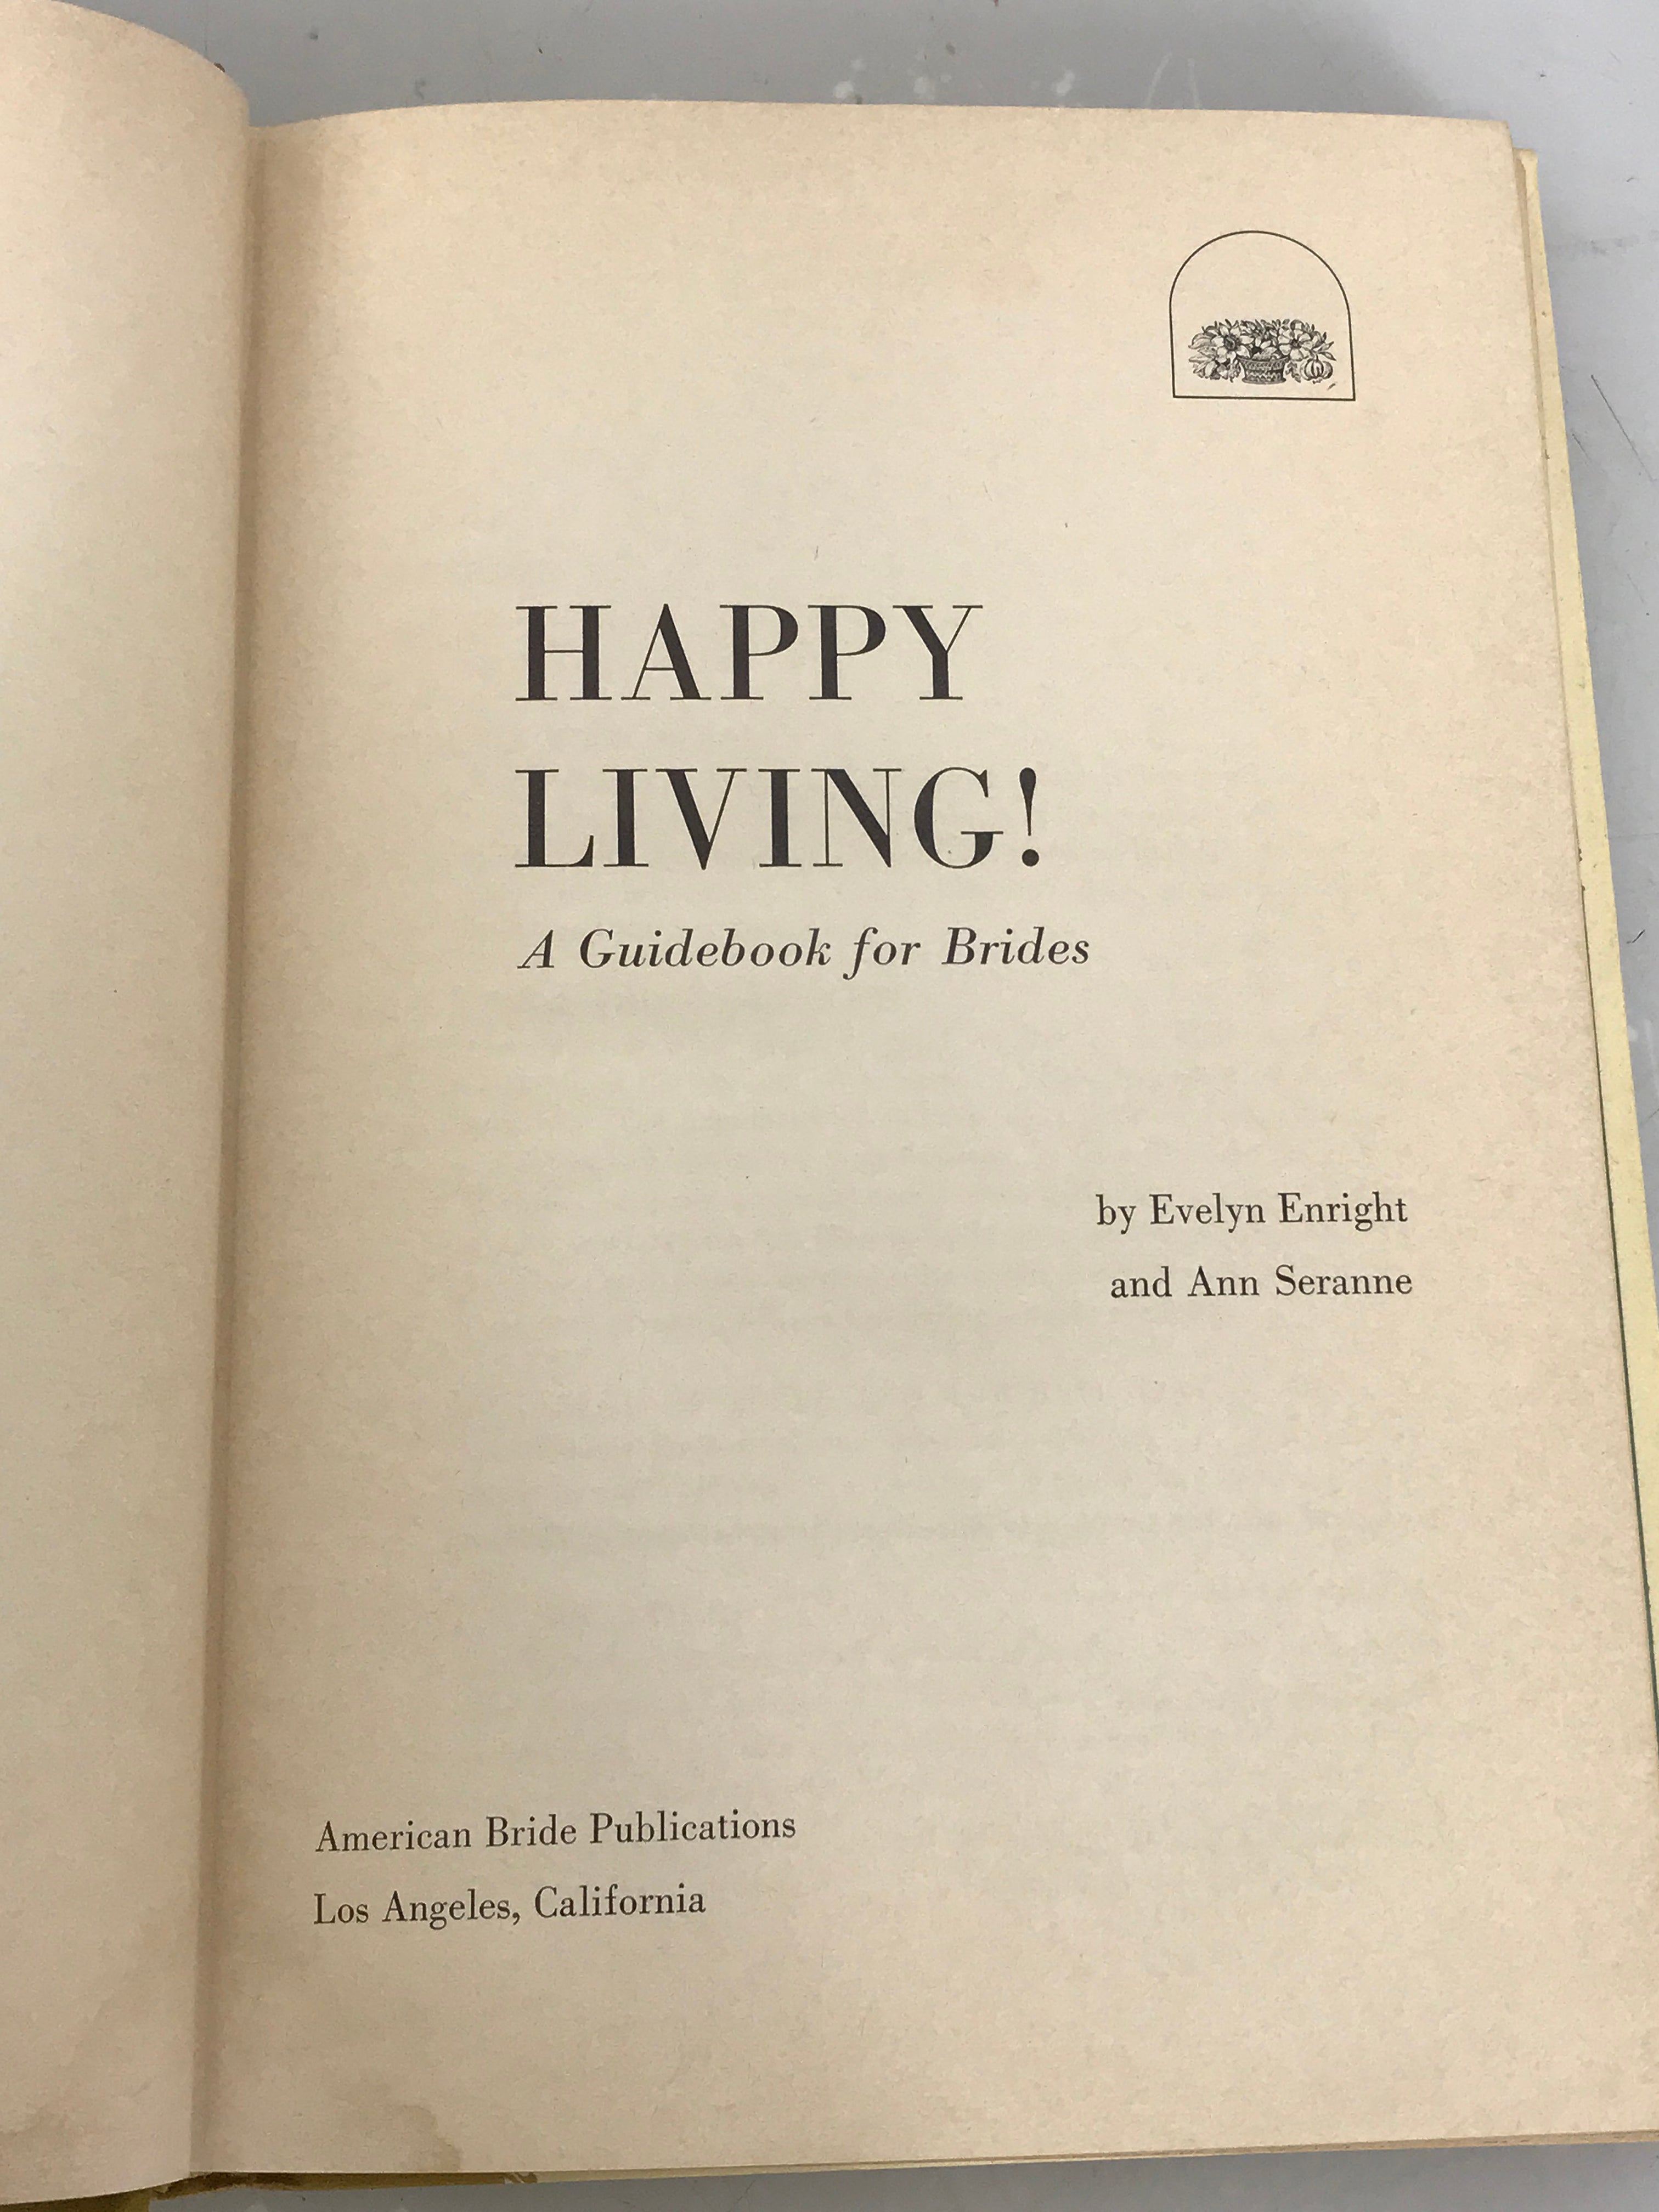 Vintage Happy Living! A Guidebook for Brides by Evelyn Enright and Ann Seranne 1966 HC